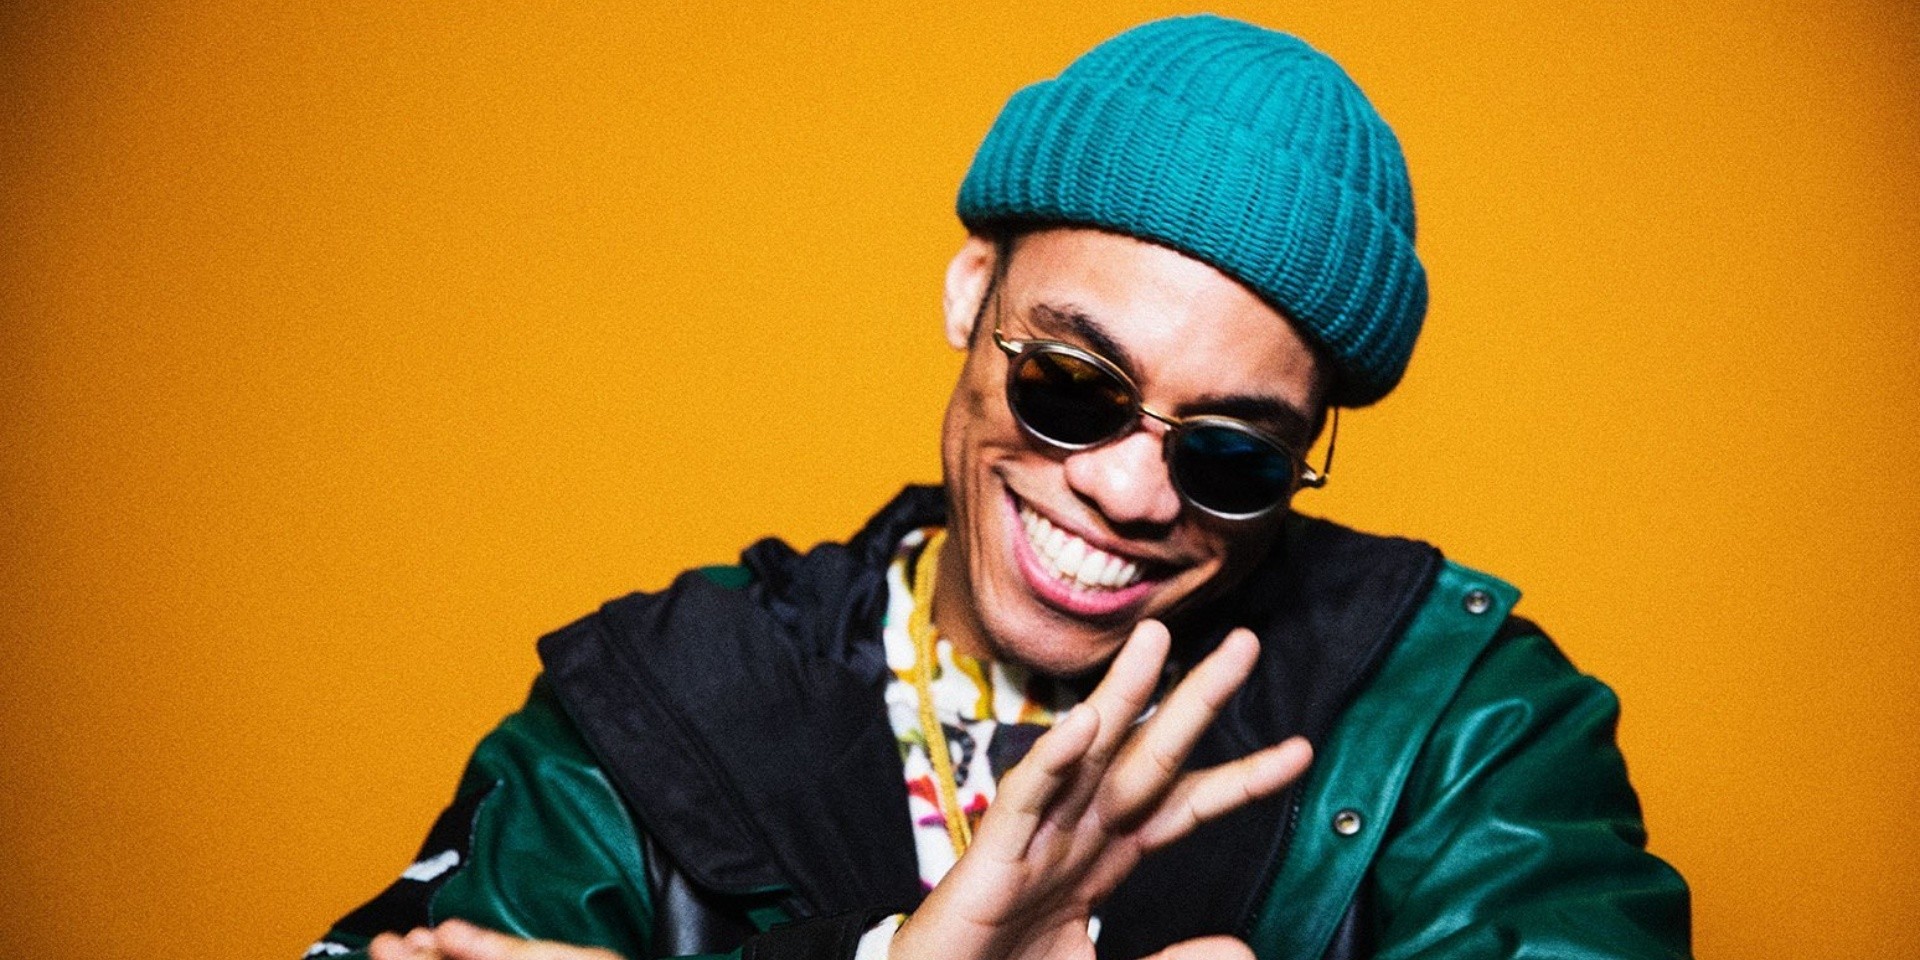 Anderson .Paak hints at two new albums with Dr Dre